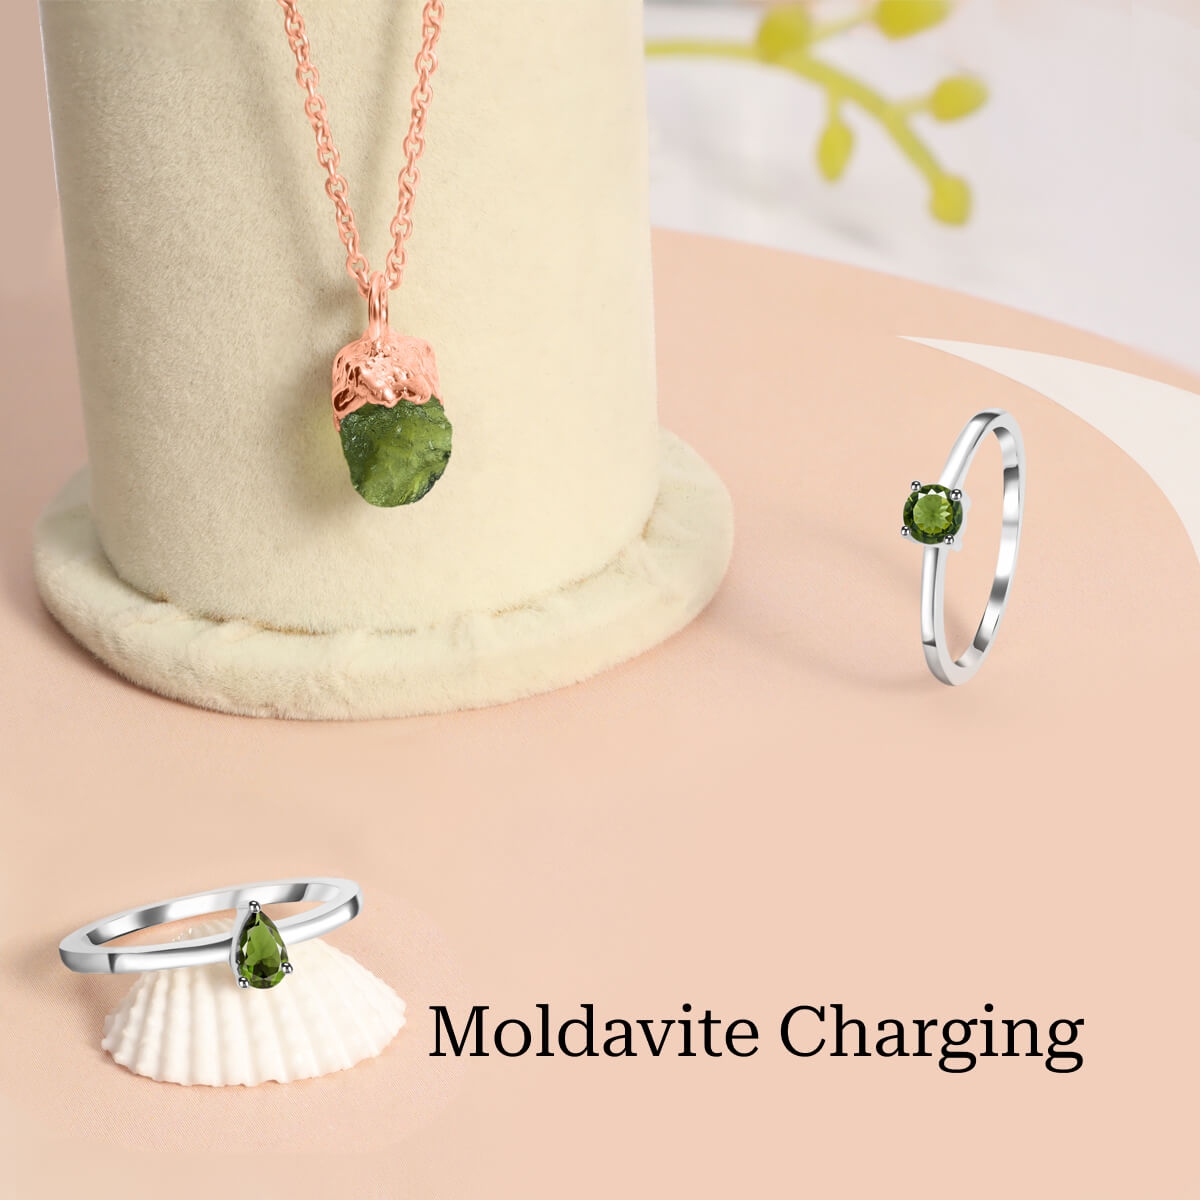 How To Charge Your Moldavite